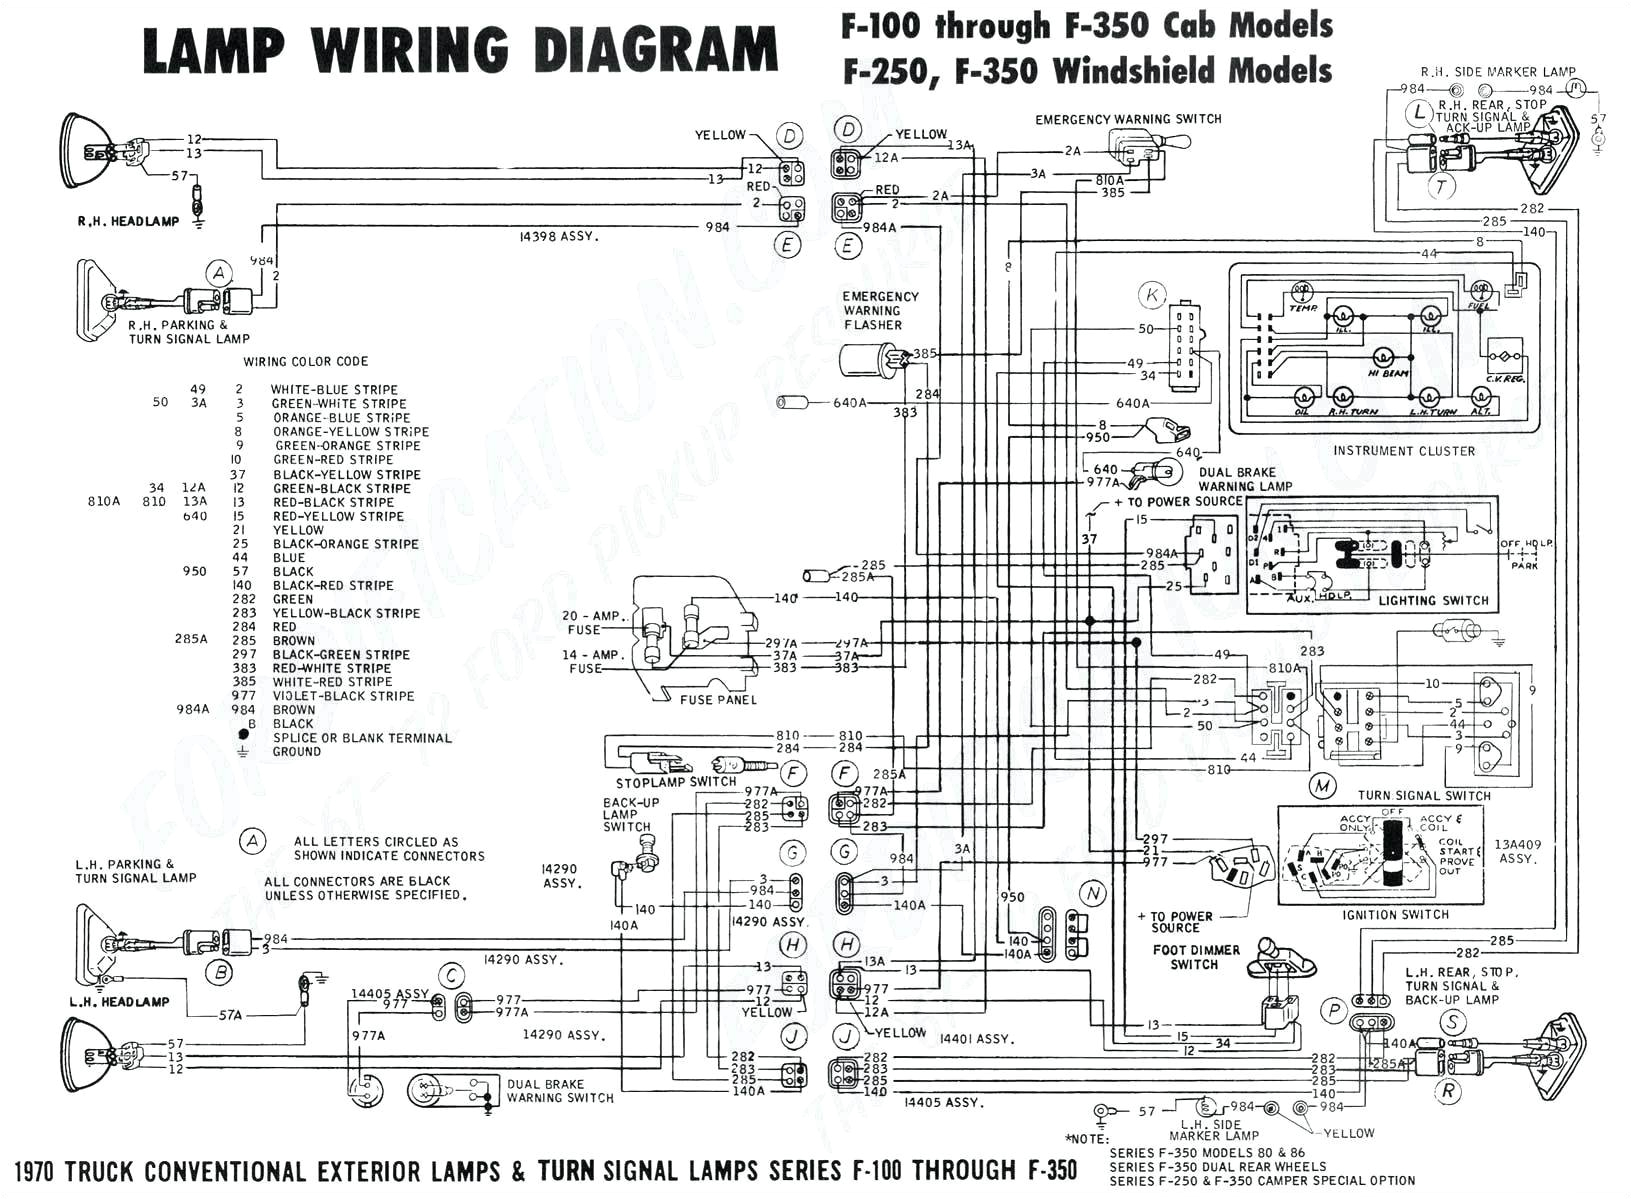 2012 toyota Tacoma Wiring Diagram Ethernet End Wiring Diagram Wiring Library